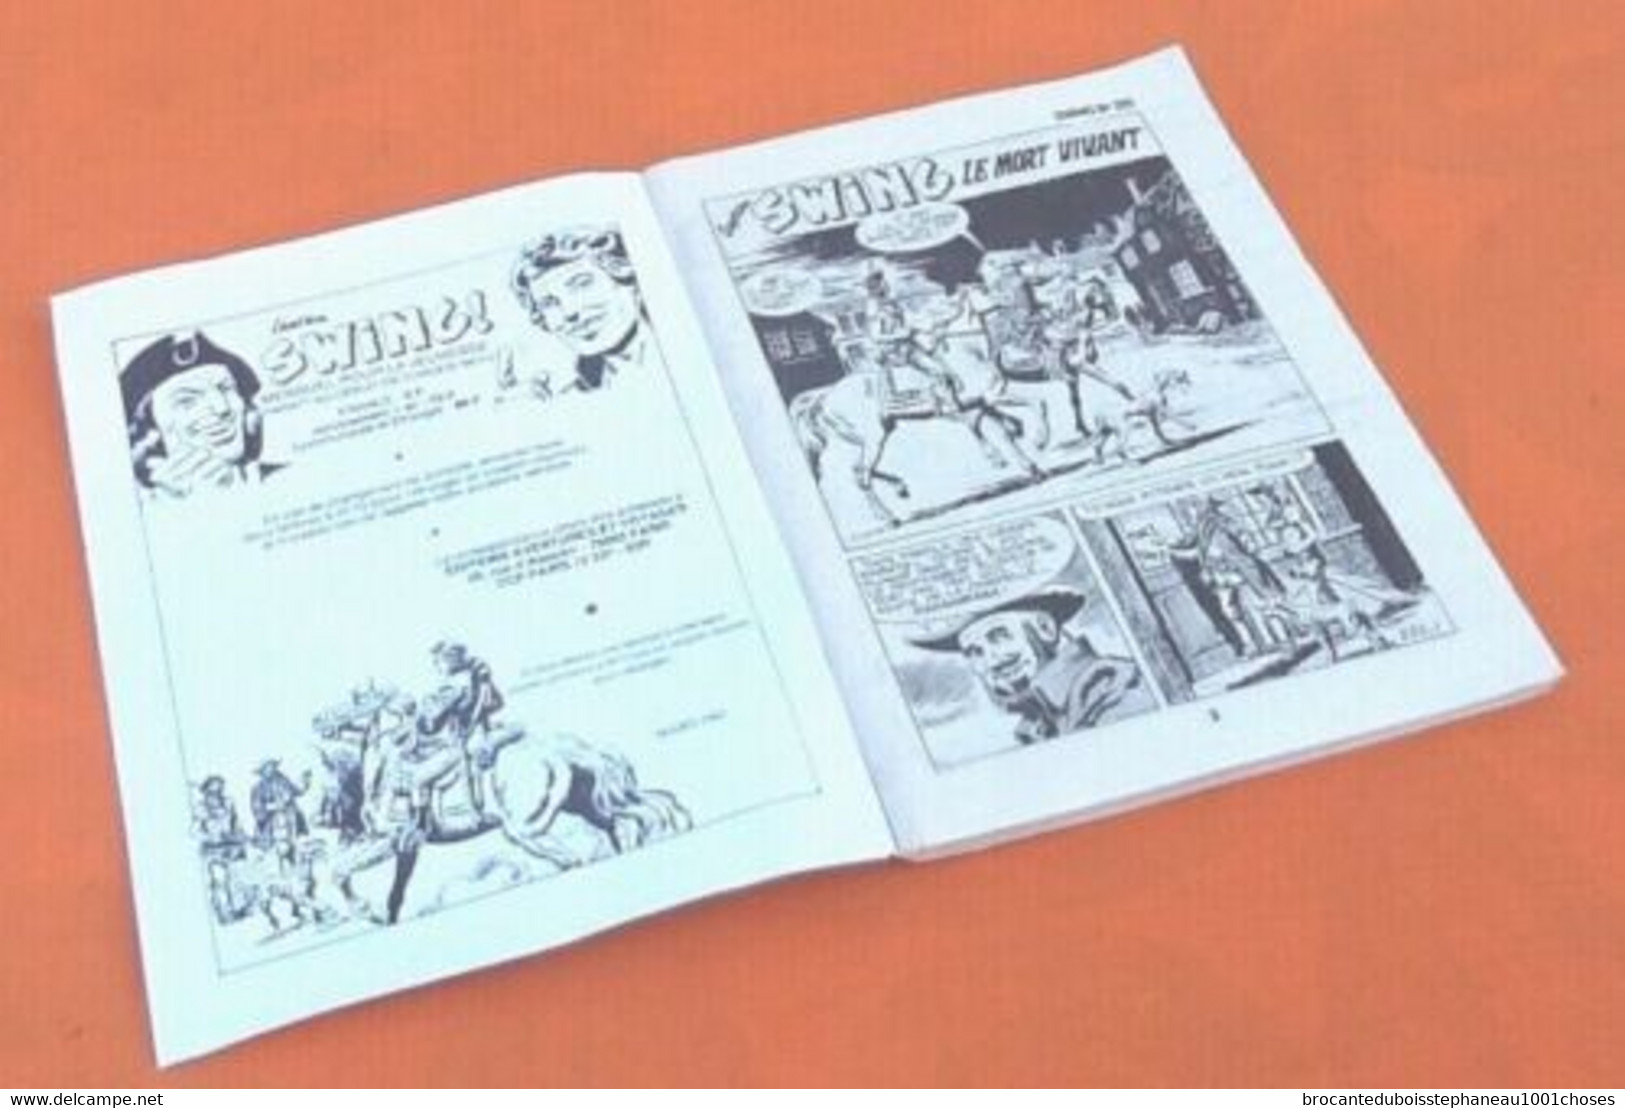 Capt' Ain Swing  (Mars 1985)  Mon Journal  N°225   130 Pages  (180x130)mm - Mon Journal